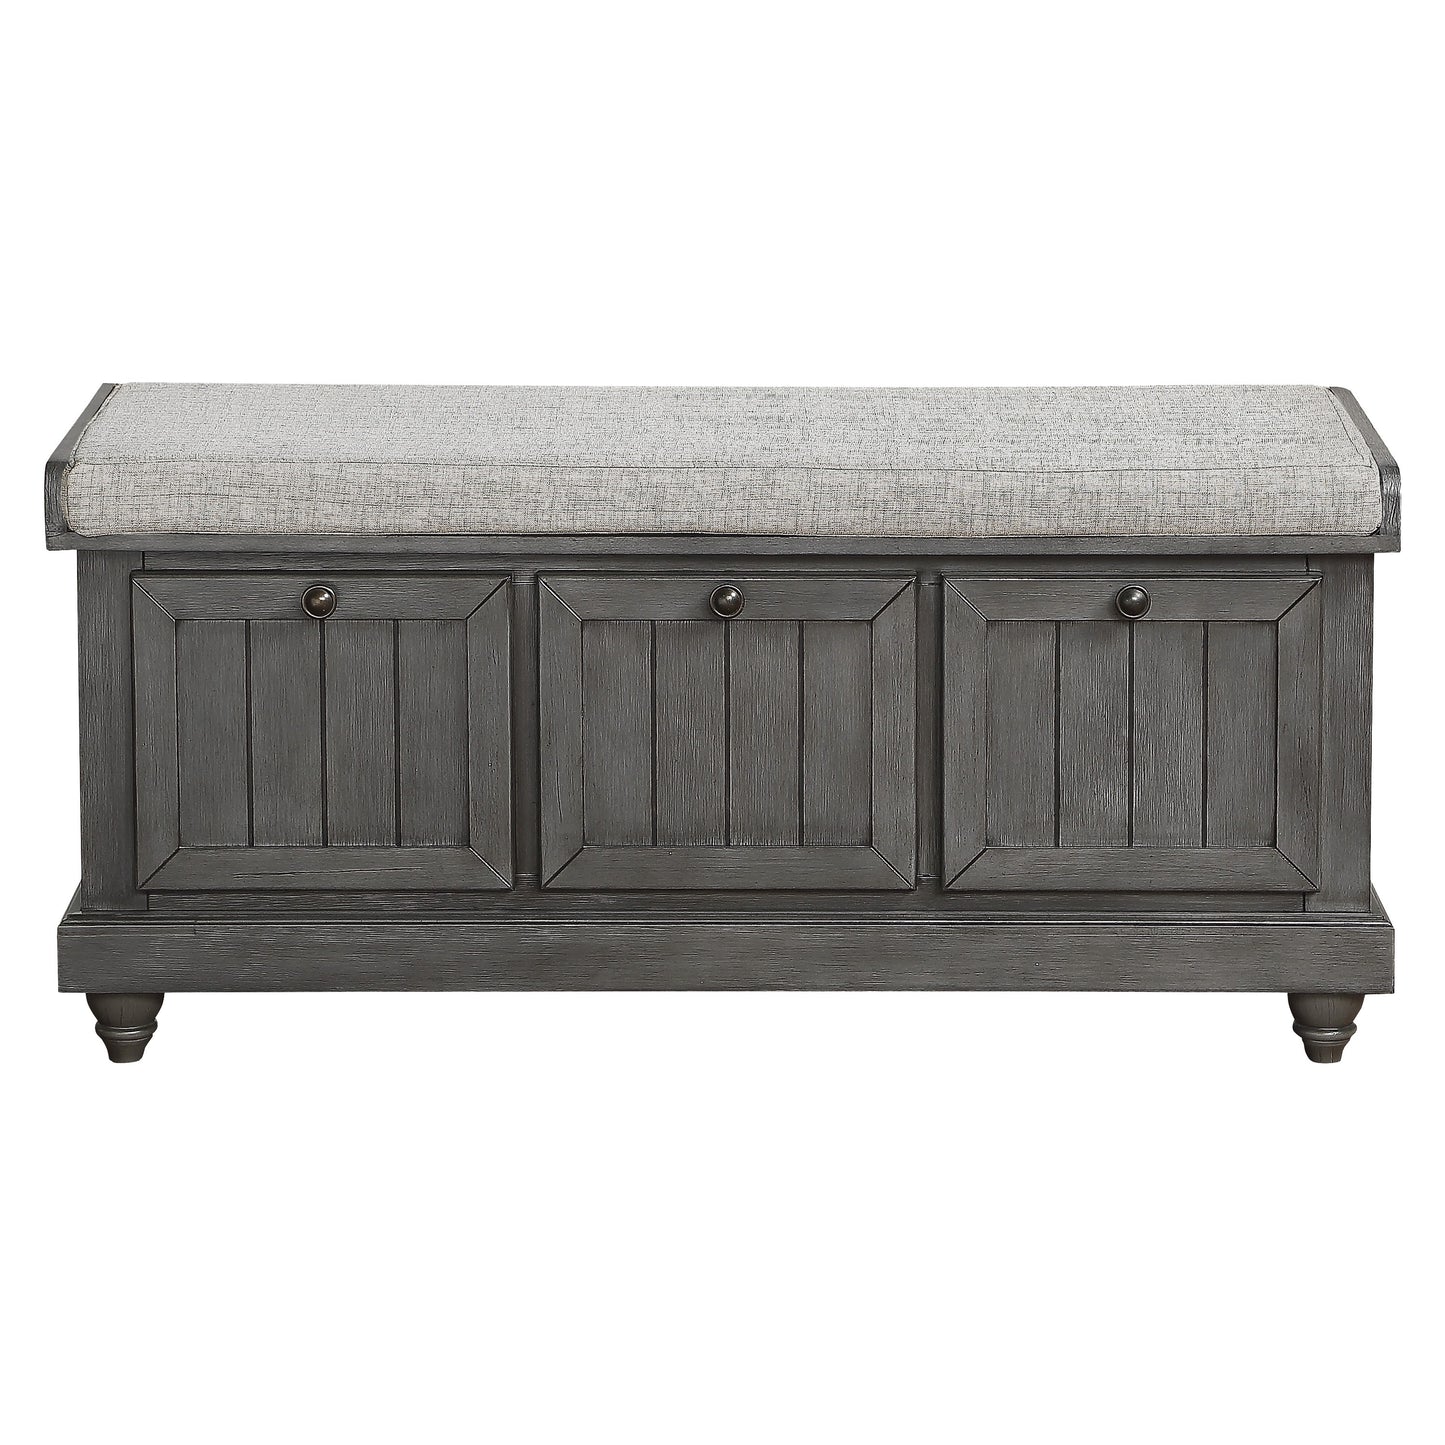 Woodwell Lift Top Storage Bench GREY